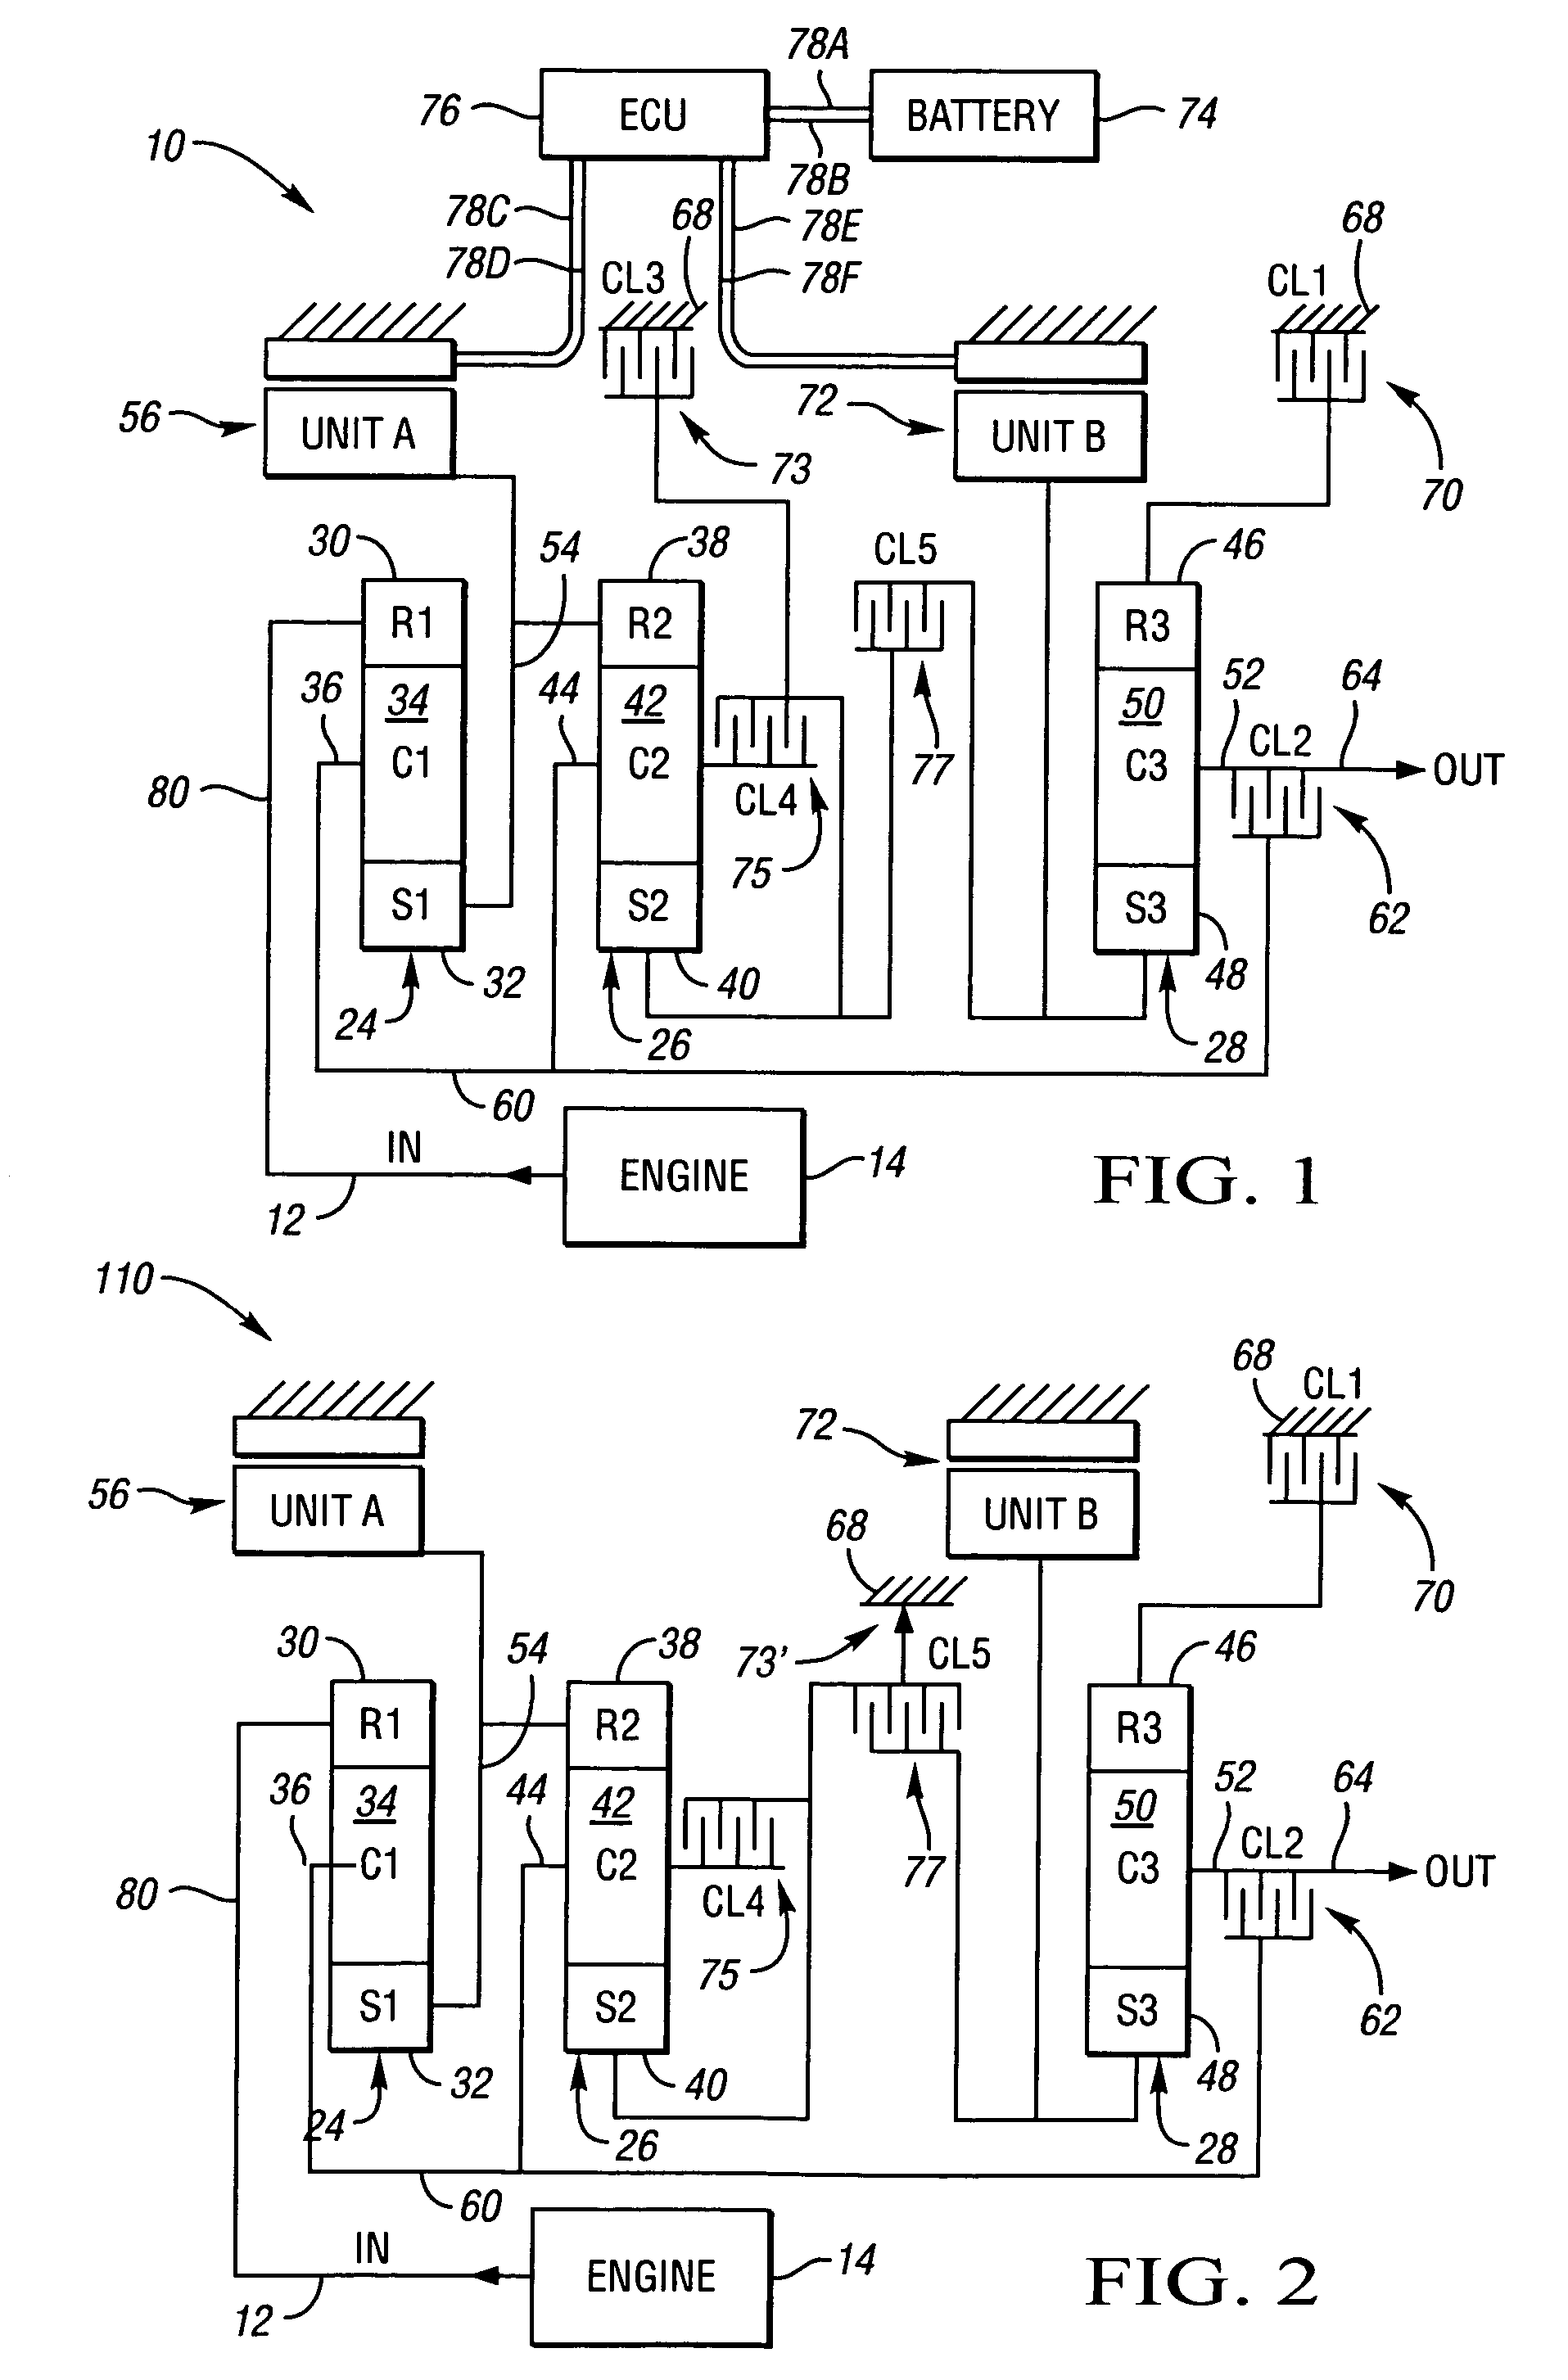 Electric variable transmission with de-coupled engine charging in reverse